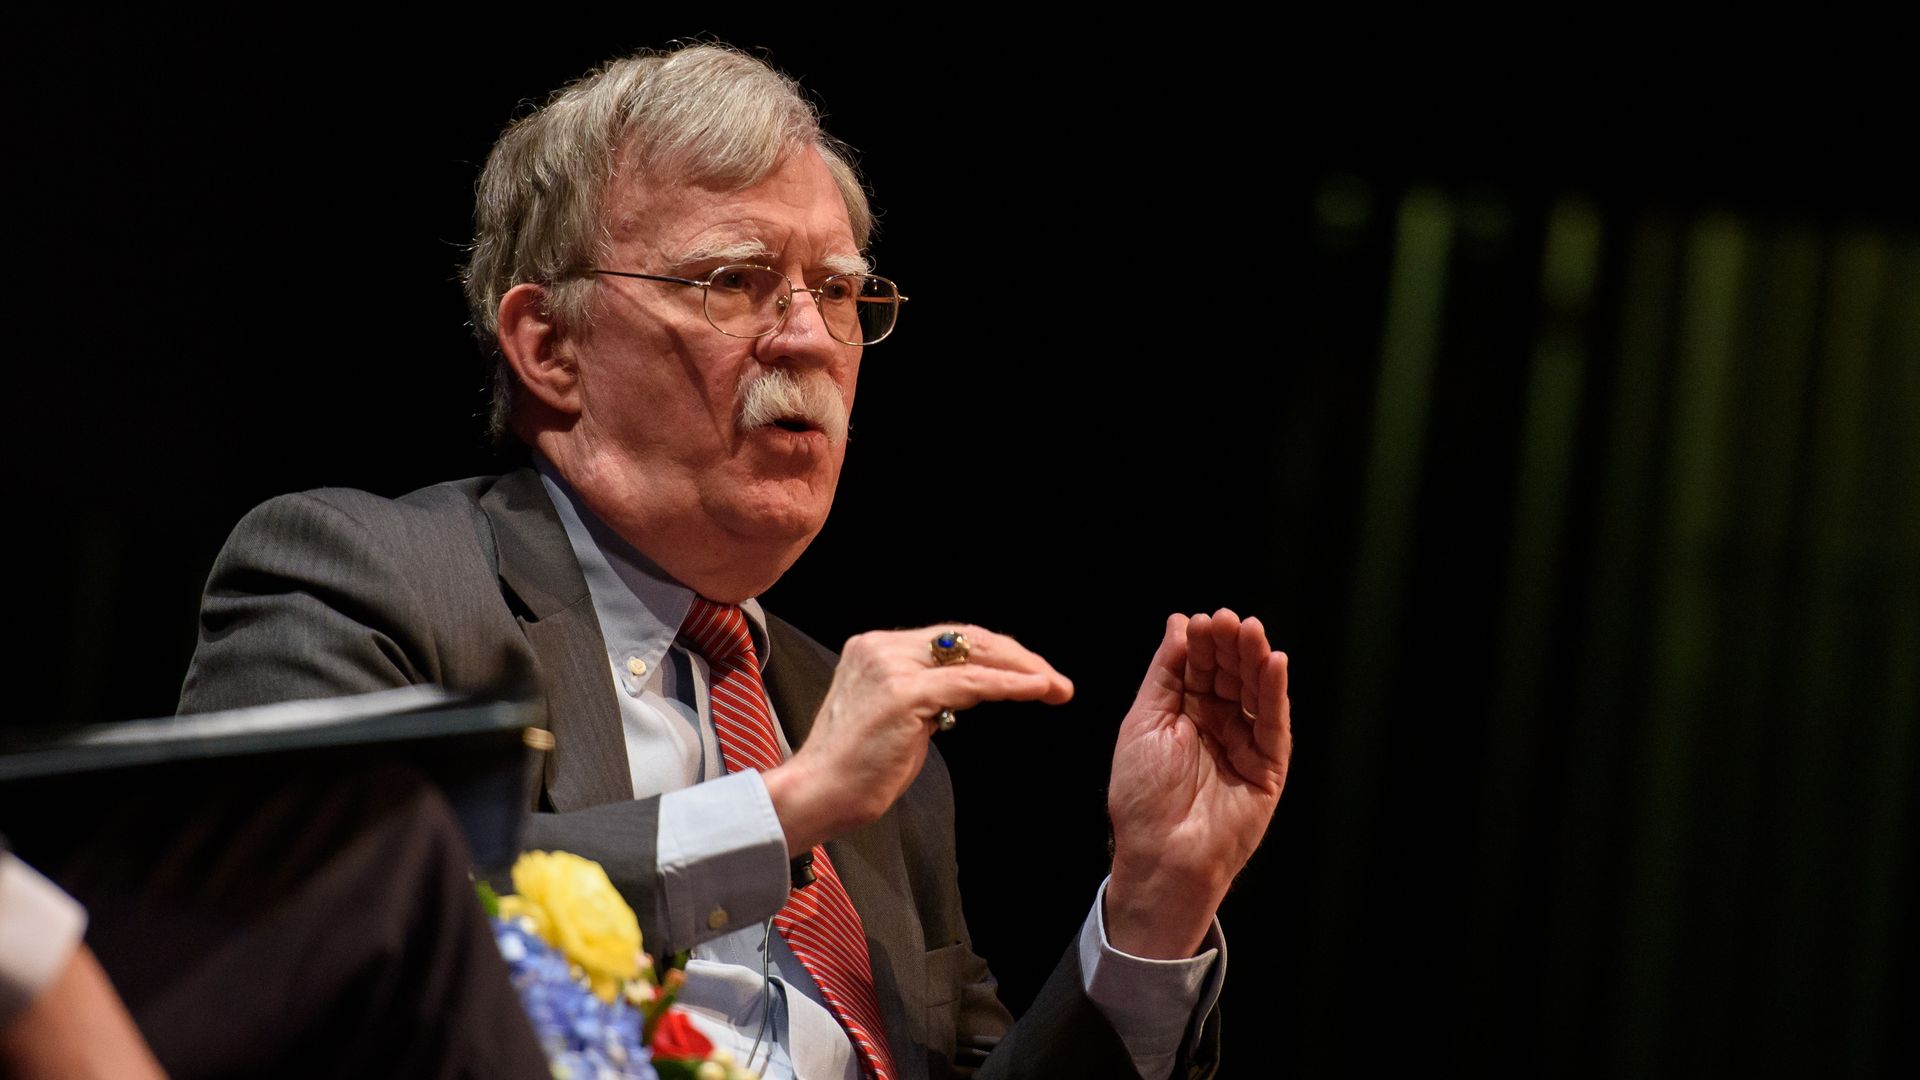 Former National Security Advisor John Bolton during a forum  at the Page Auditorium on the campus of Duke University on February 17, 2020 in Durham, North Carolina. 